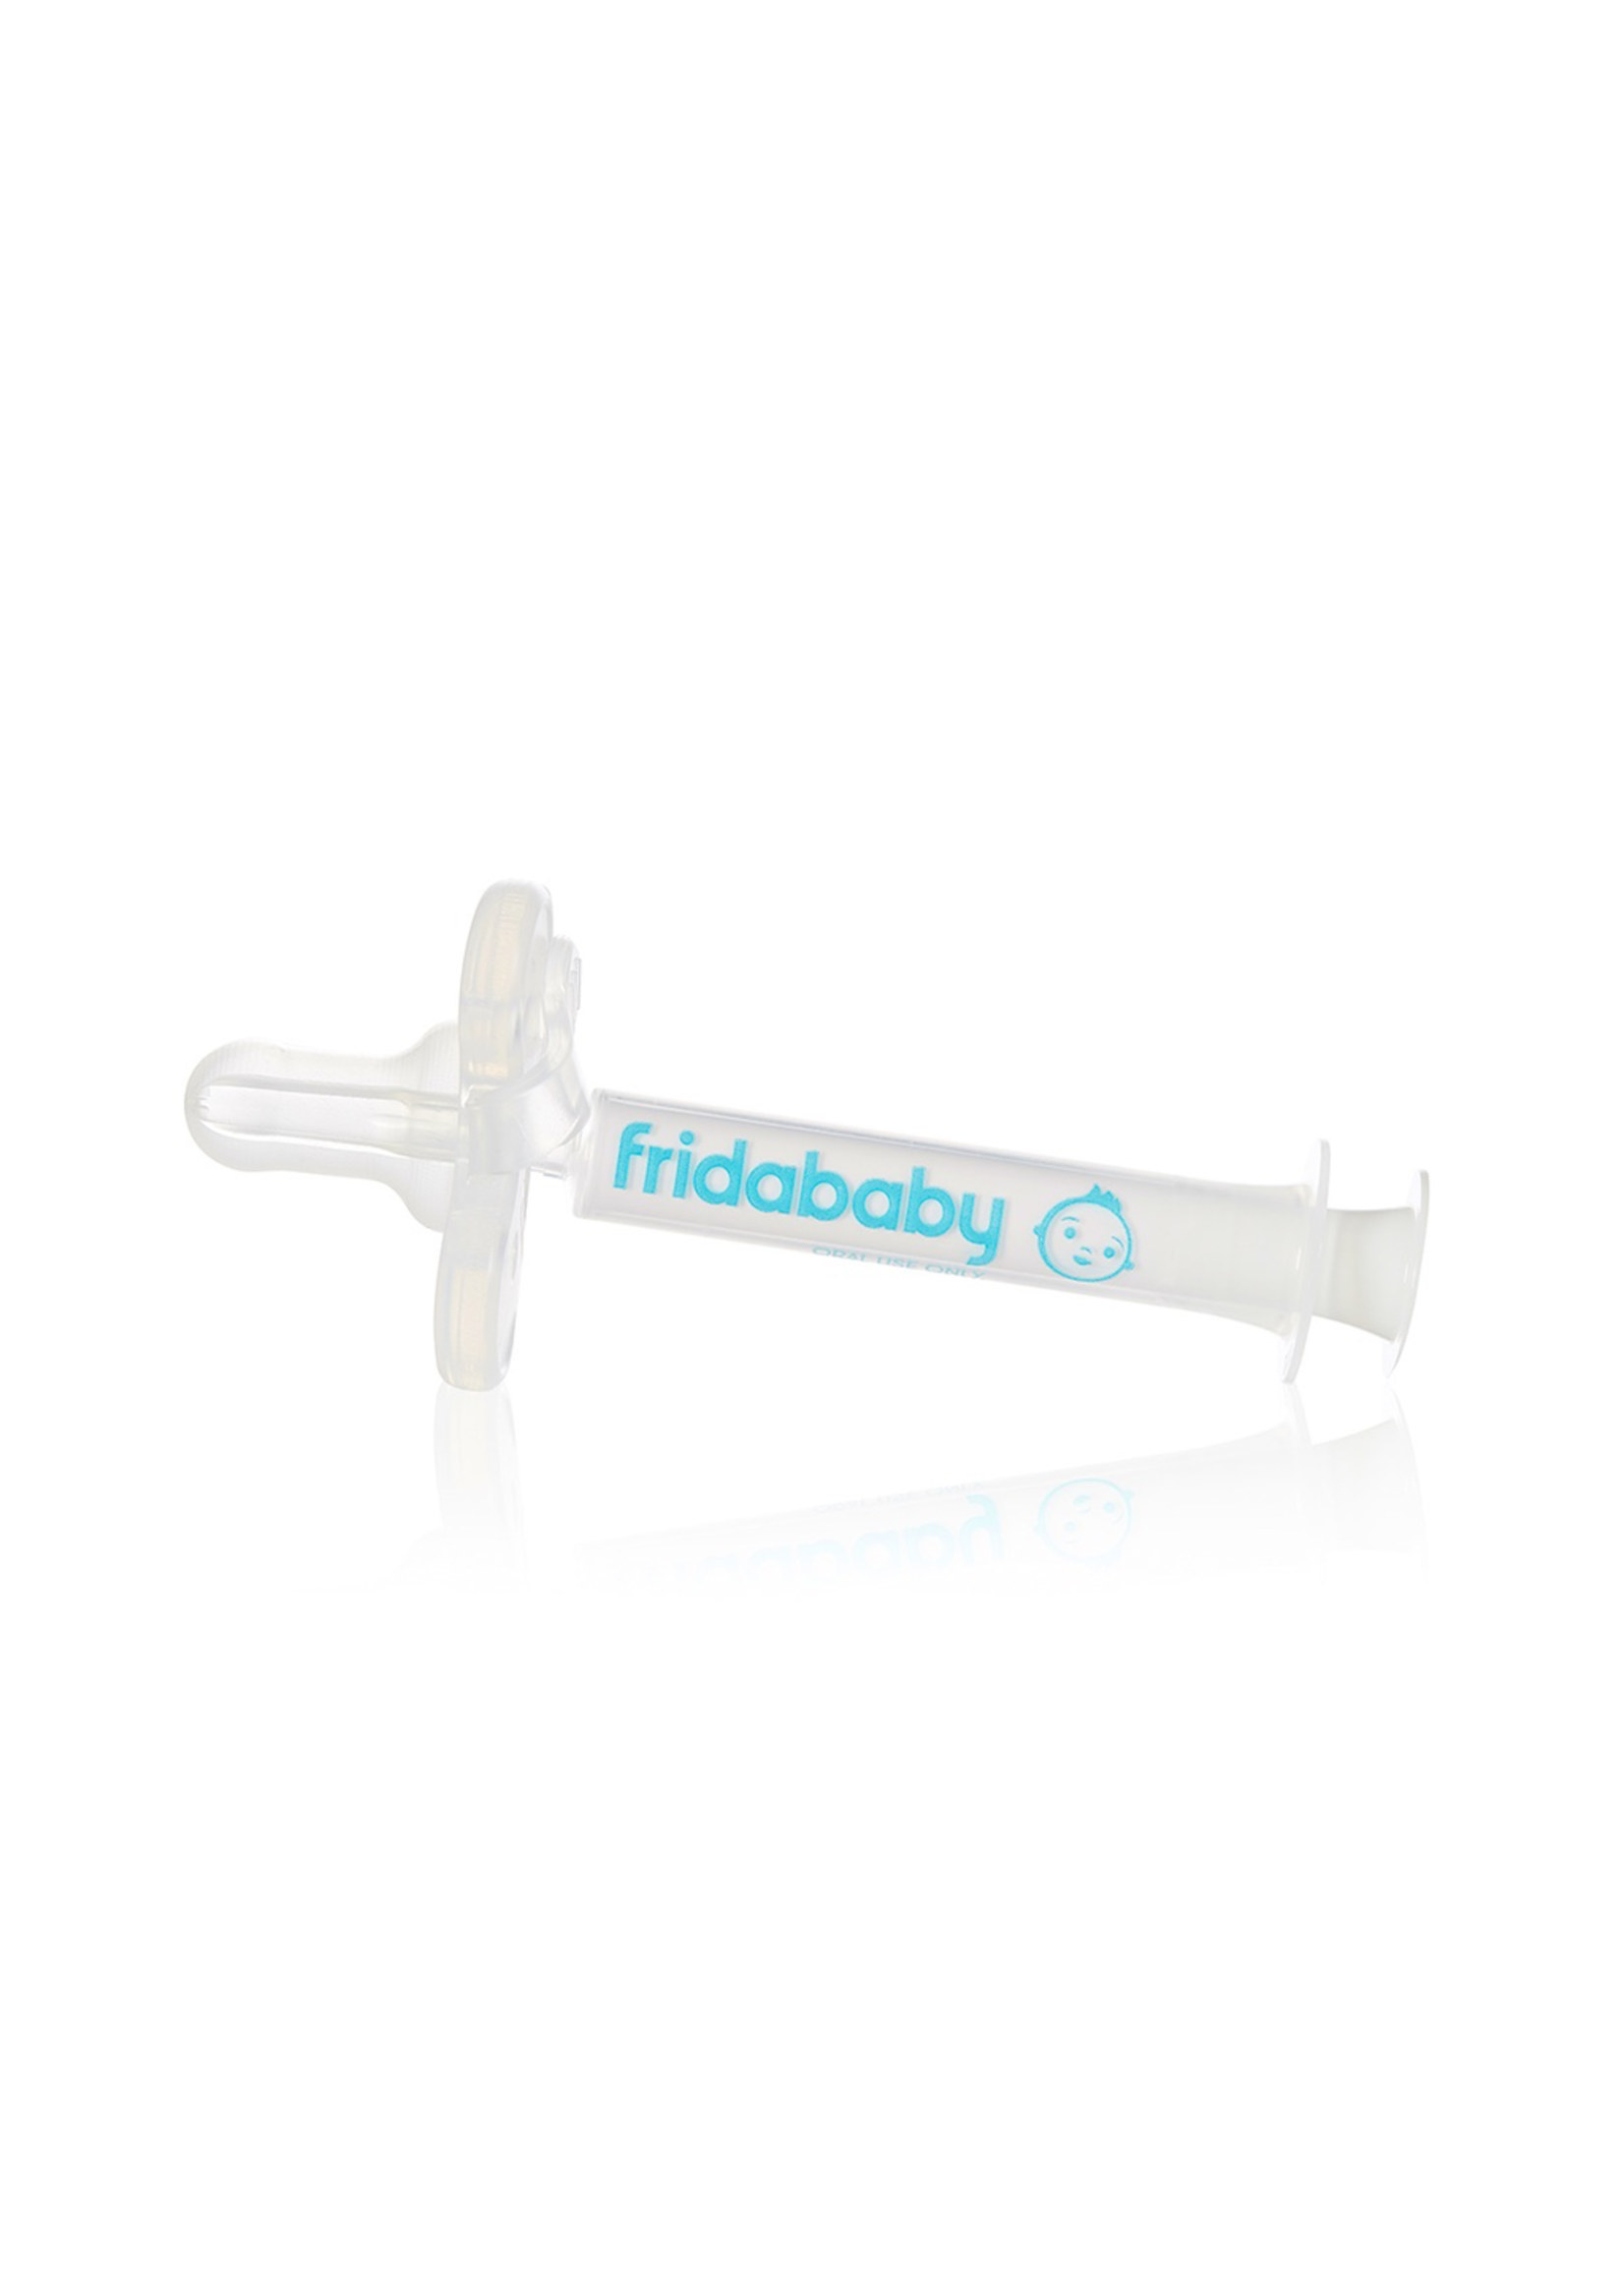 Fridababy MediFrida, the Accu-Dose Pacifier